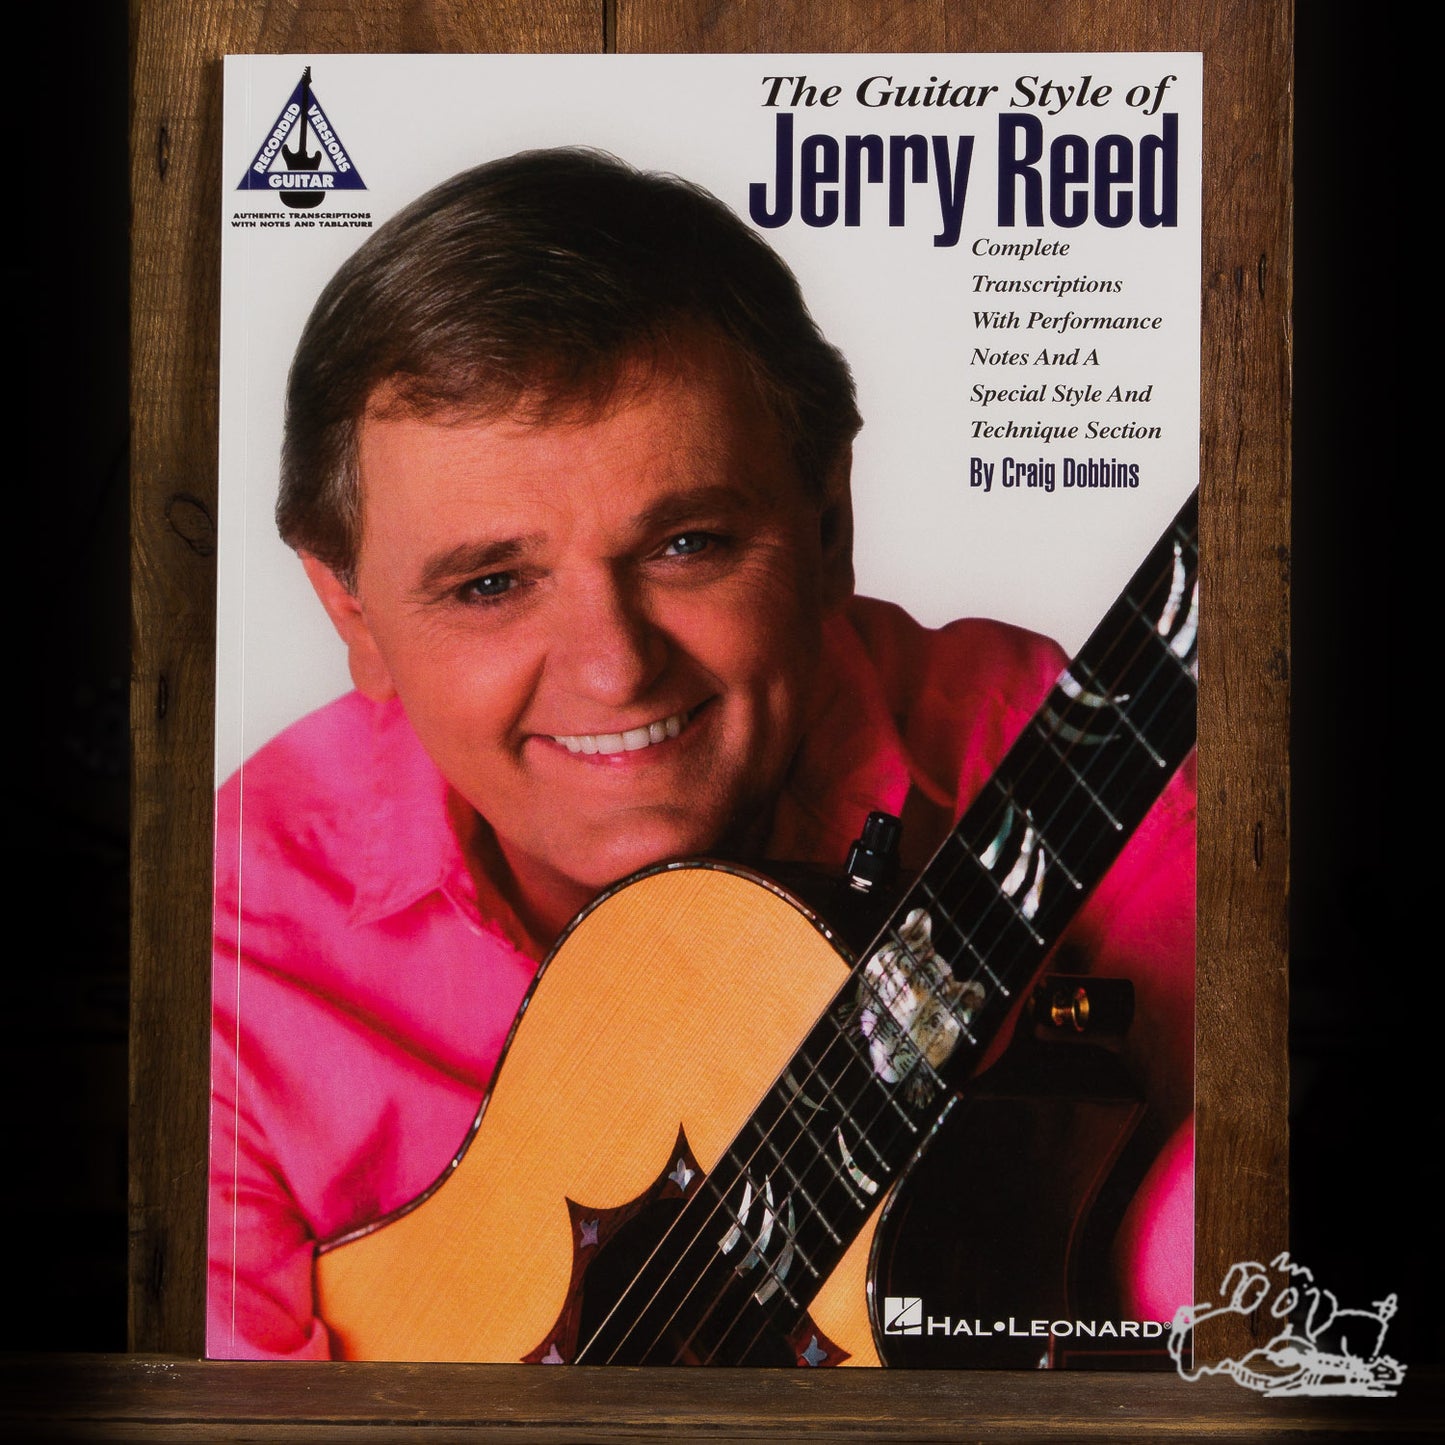 The Guitar Style of Jerry Reed